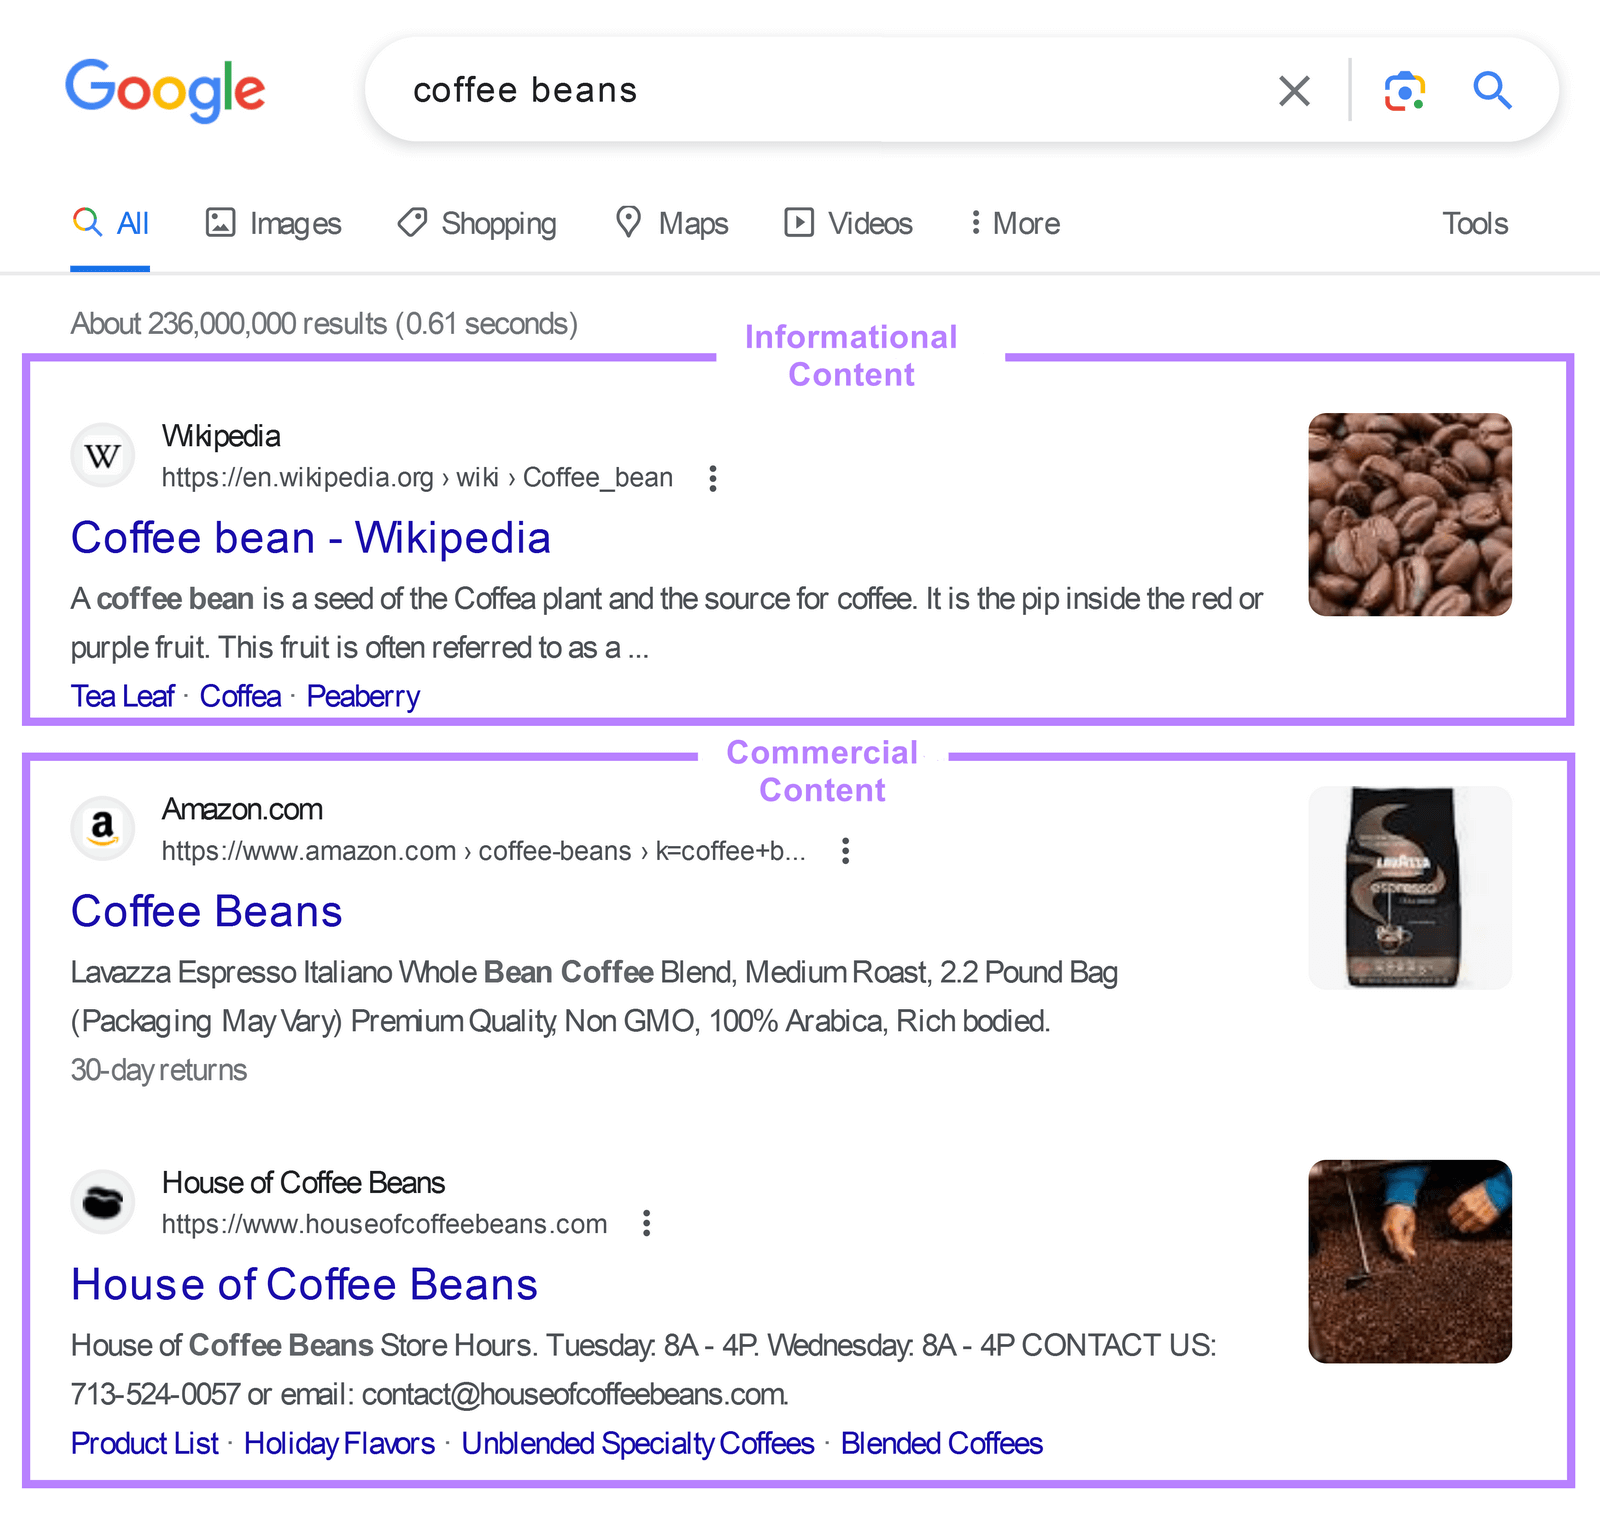 Google’s search results for “coffee beans”